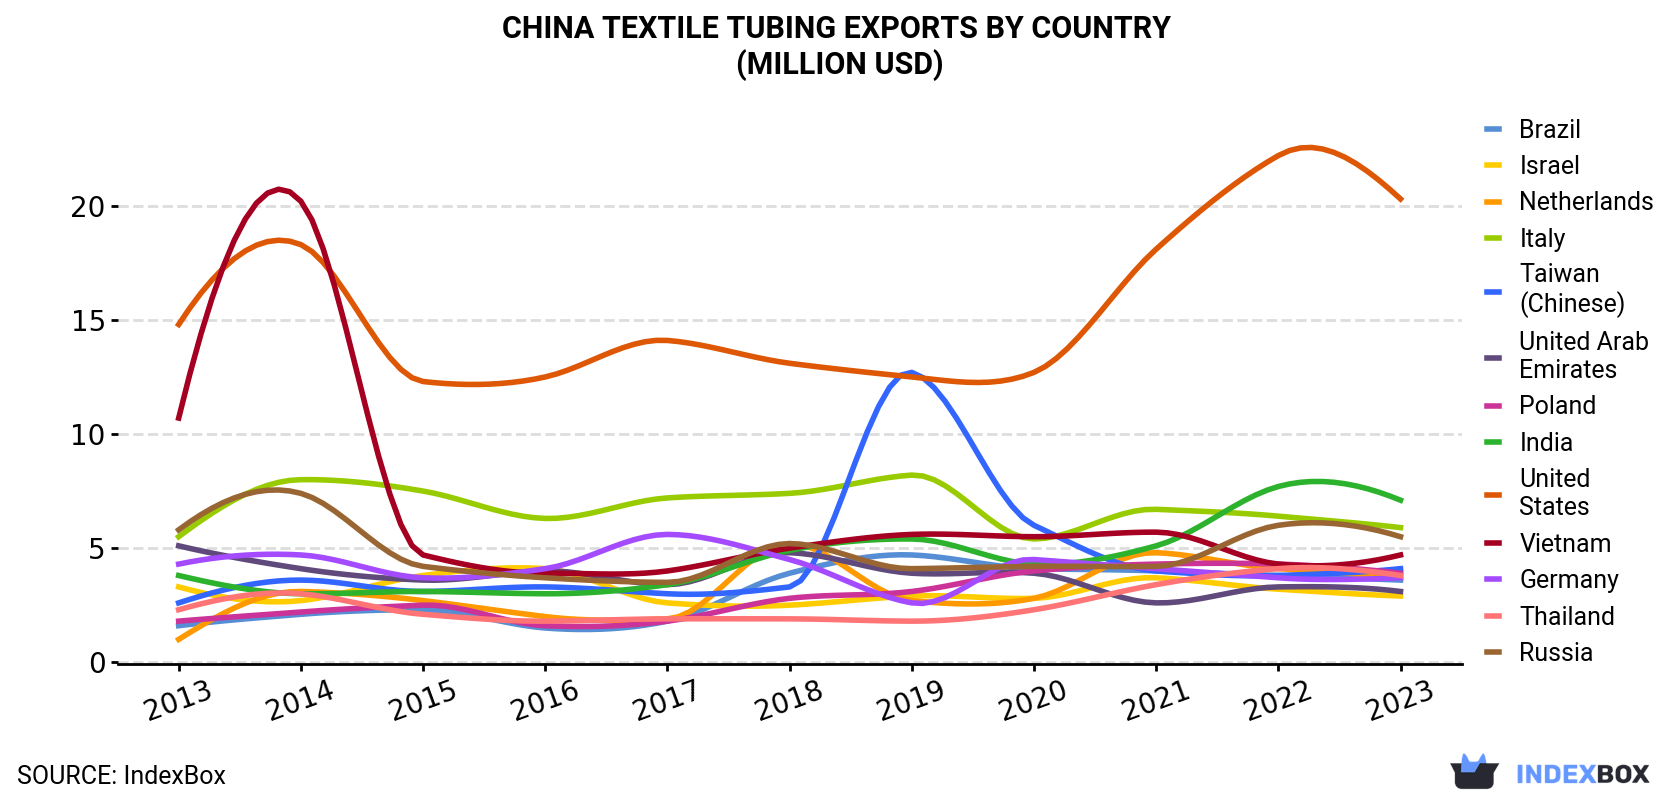 China Textile Tubing Exports By Country (Million USD)